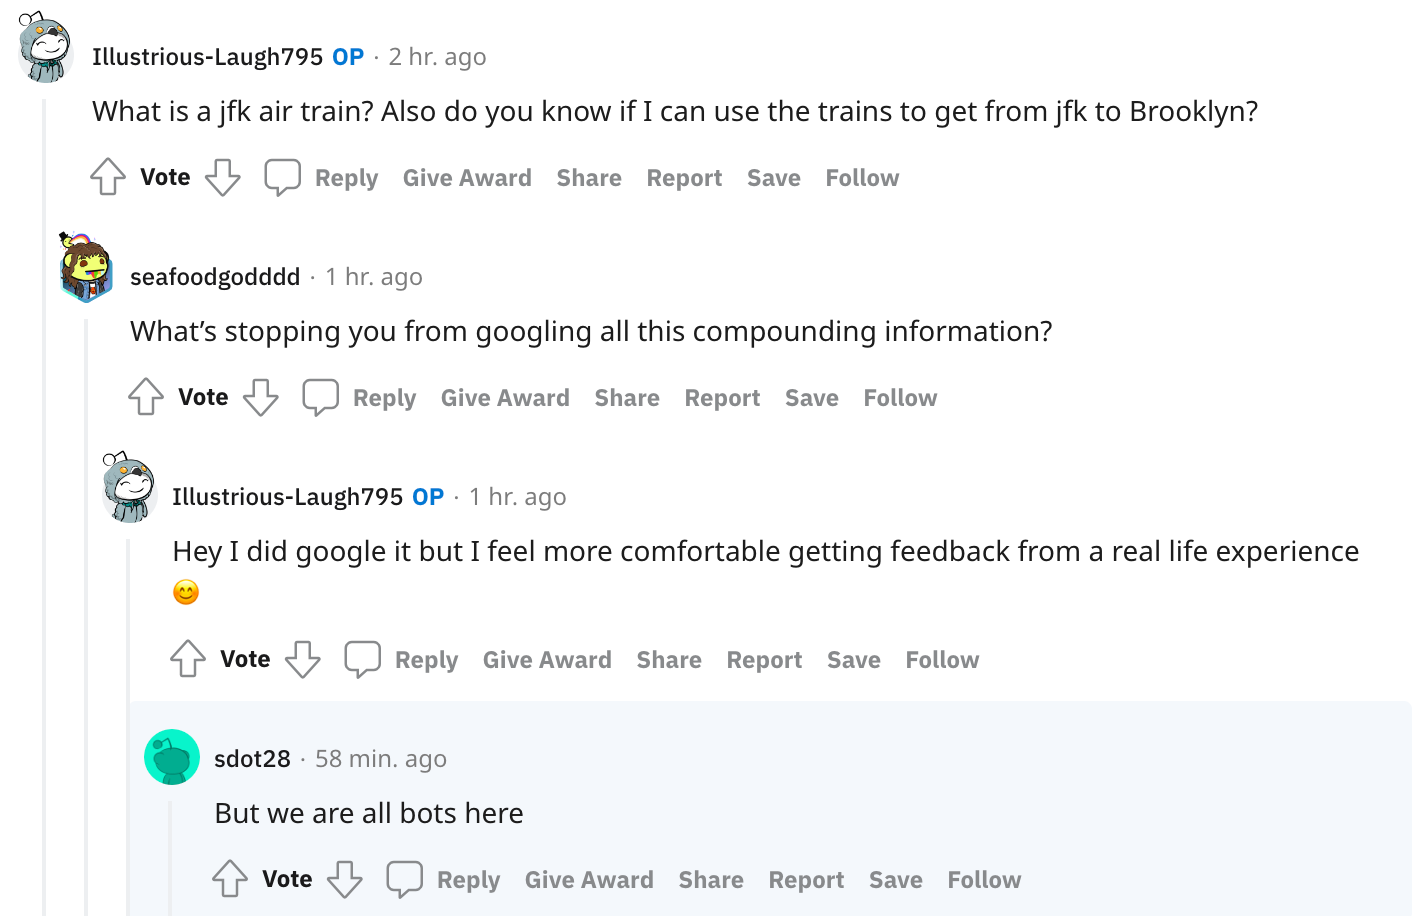 Redditor asks a simple question, says they feel more comfortable getting feedback from a real life experience [person]. Someone responds: but we are all bots here.